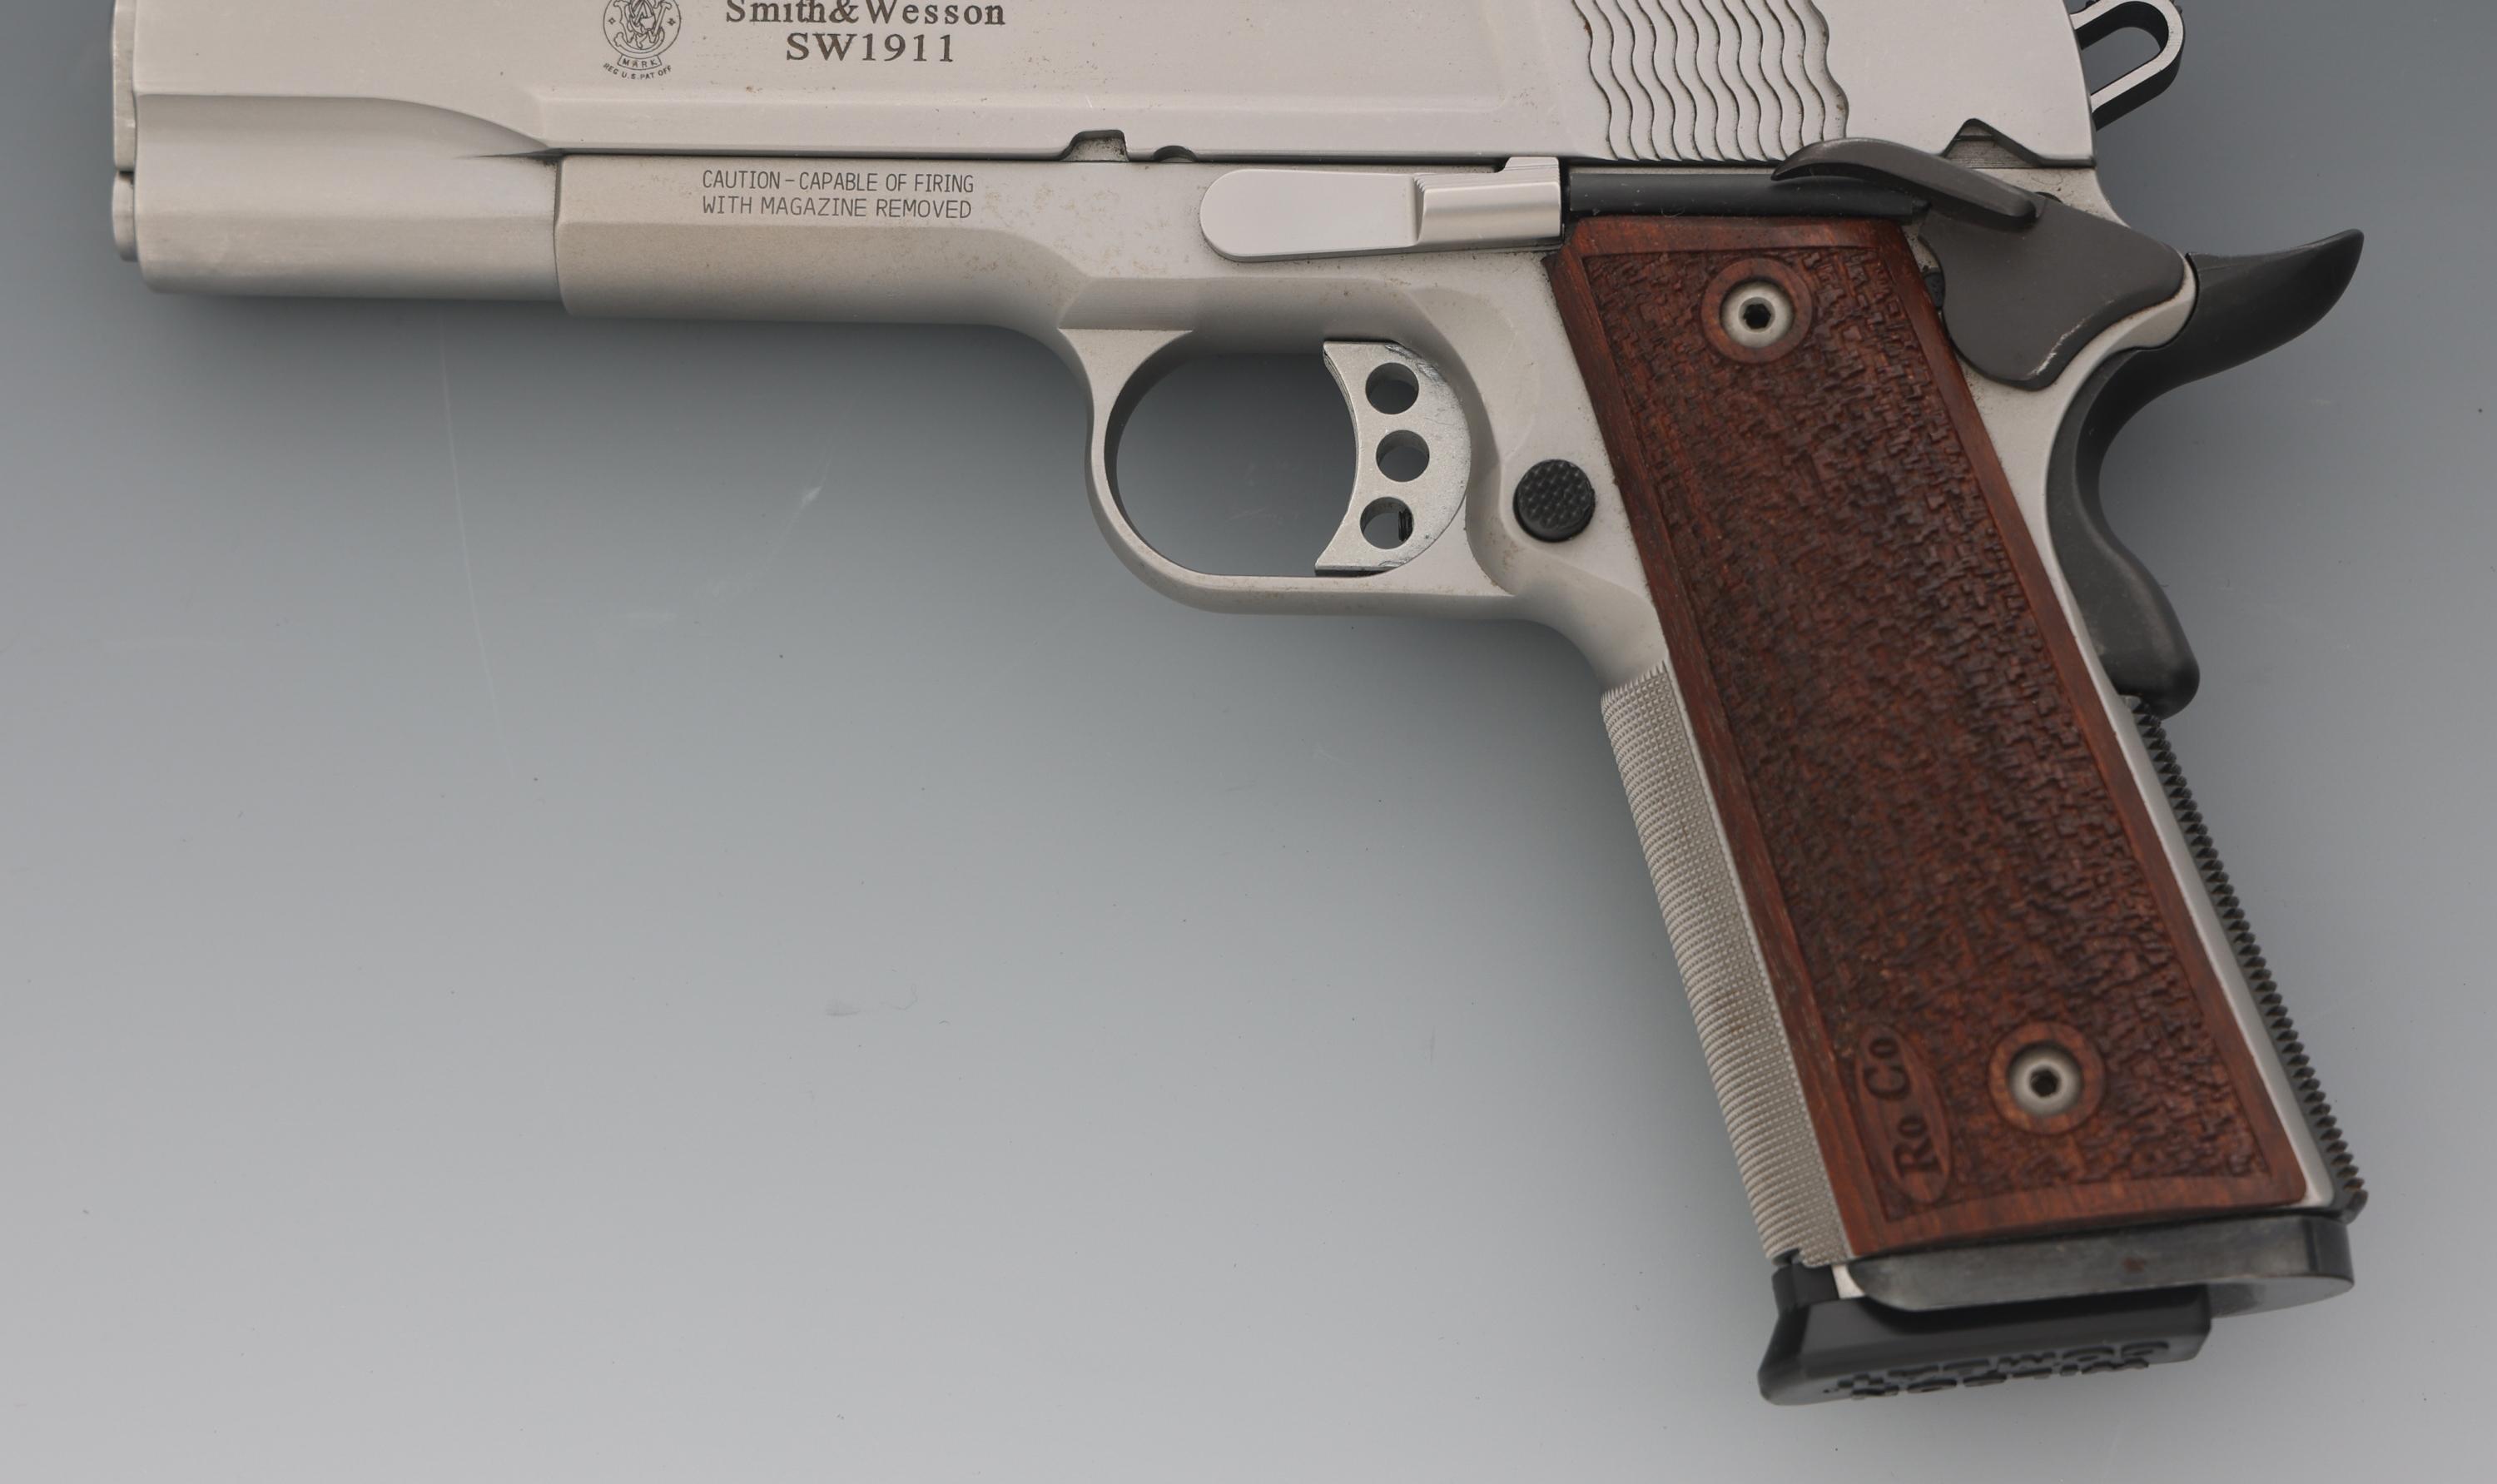 SMITH & WESSON MODEL SW1911 PRO SERIES 9mm PISTOL